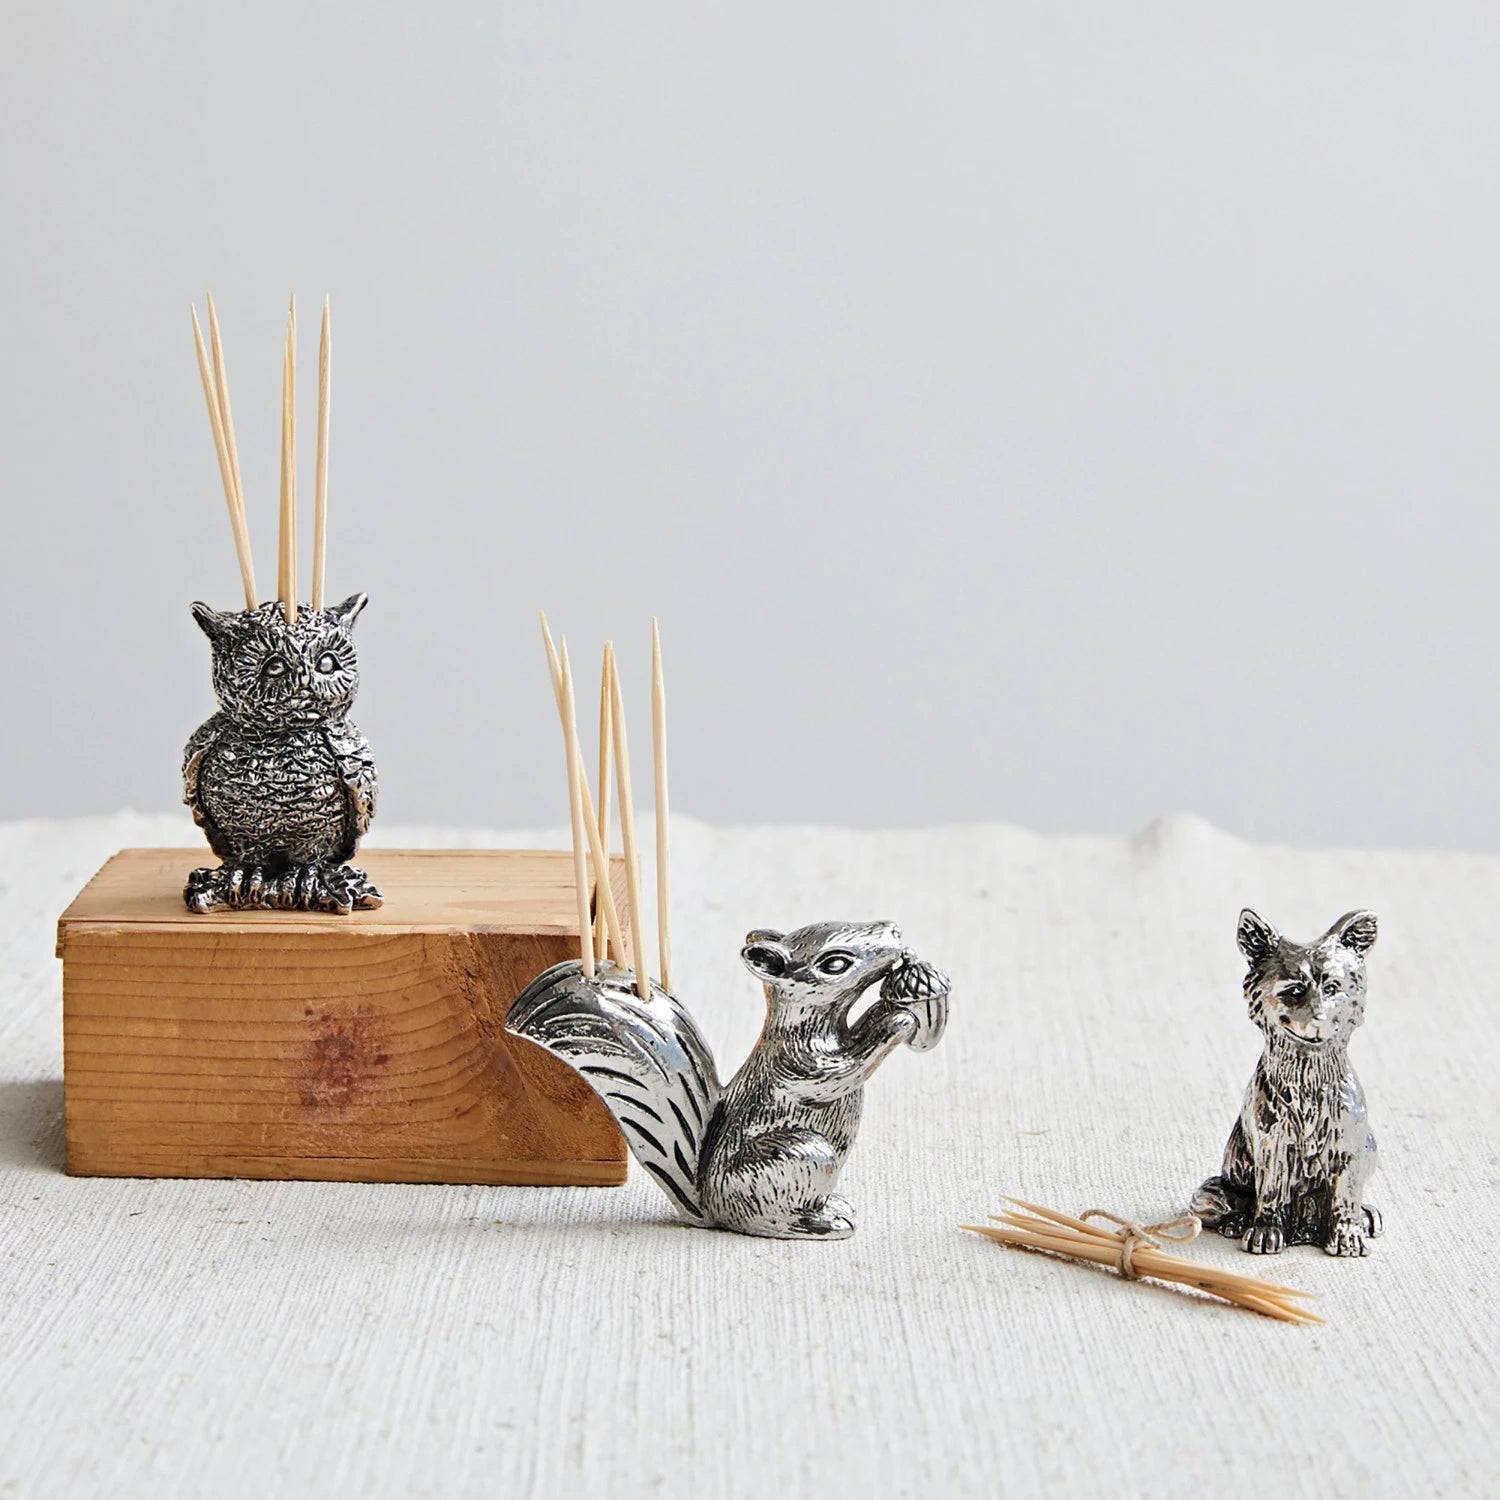 Pewter Squirrel Toothpick Holder w/ 6 Toothpicks - Findlay Rowe Designs